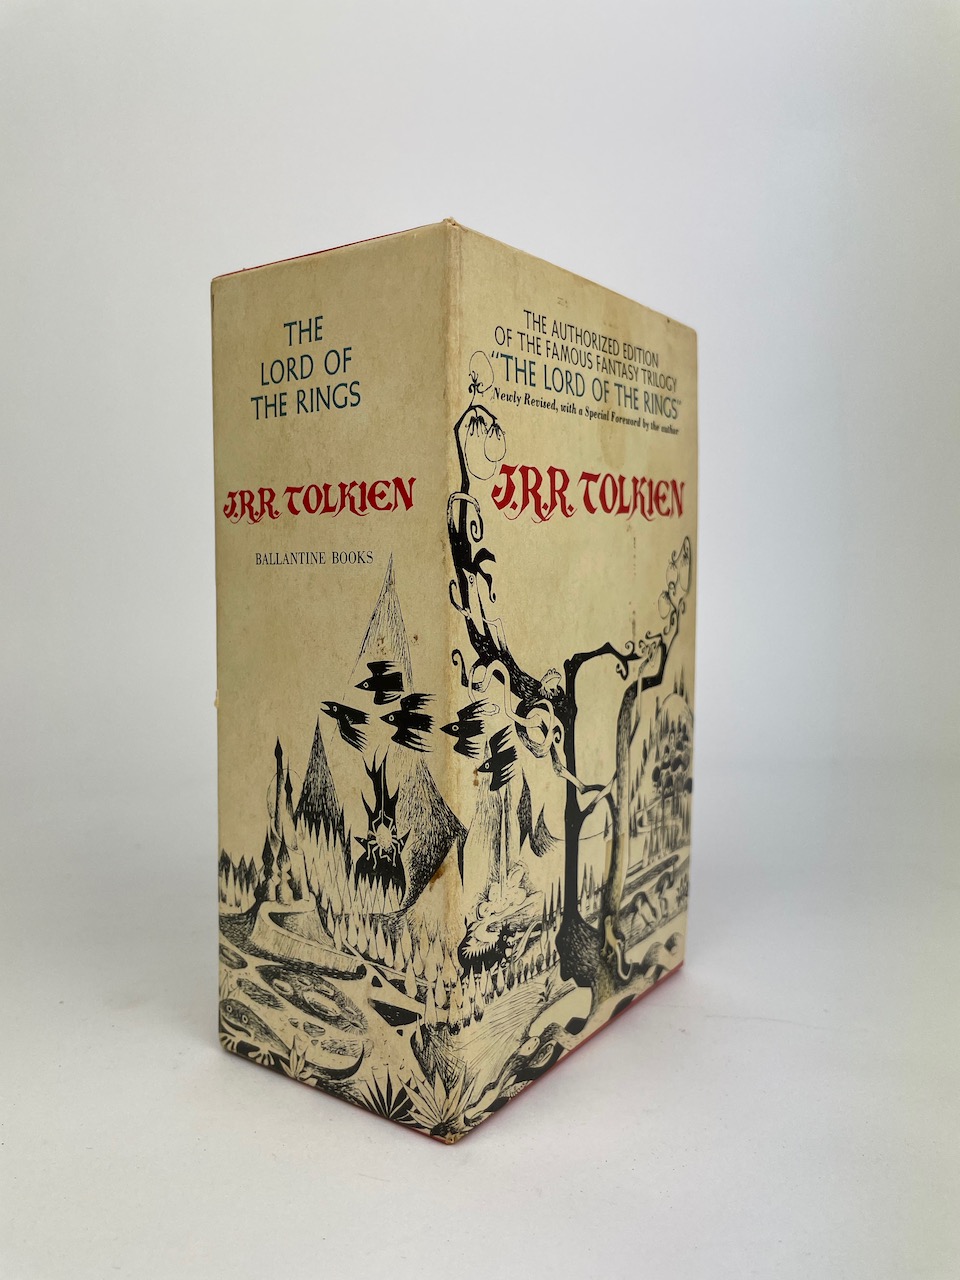 The Lord of the Rings from 1968, Authorized Edition in Black, White and Red Publishers Slipcase 3